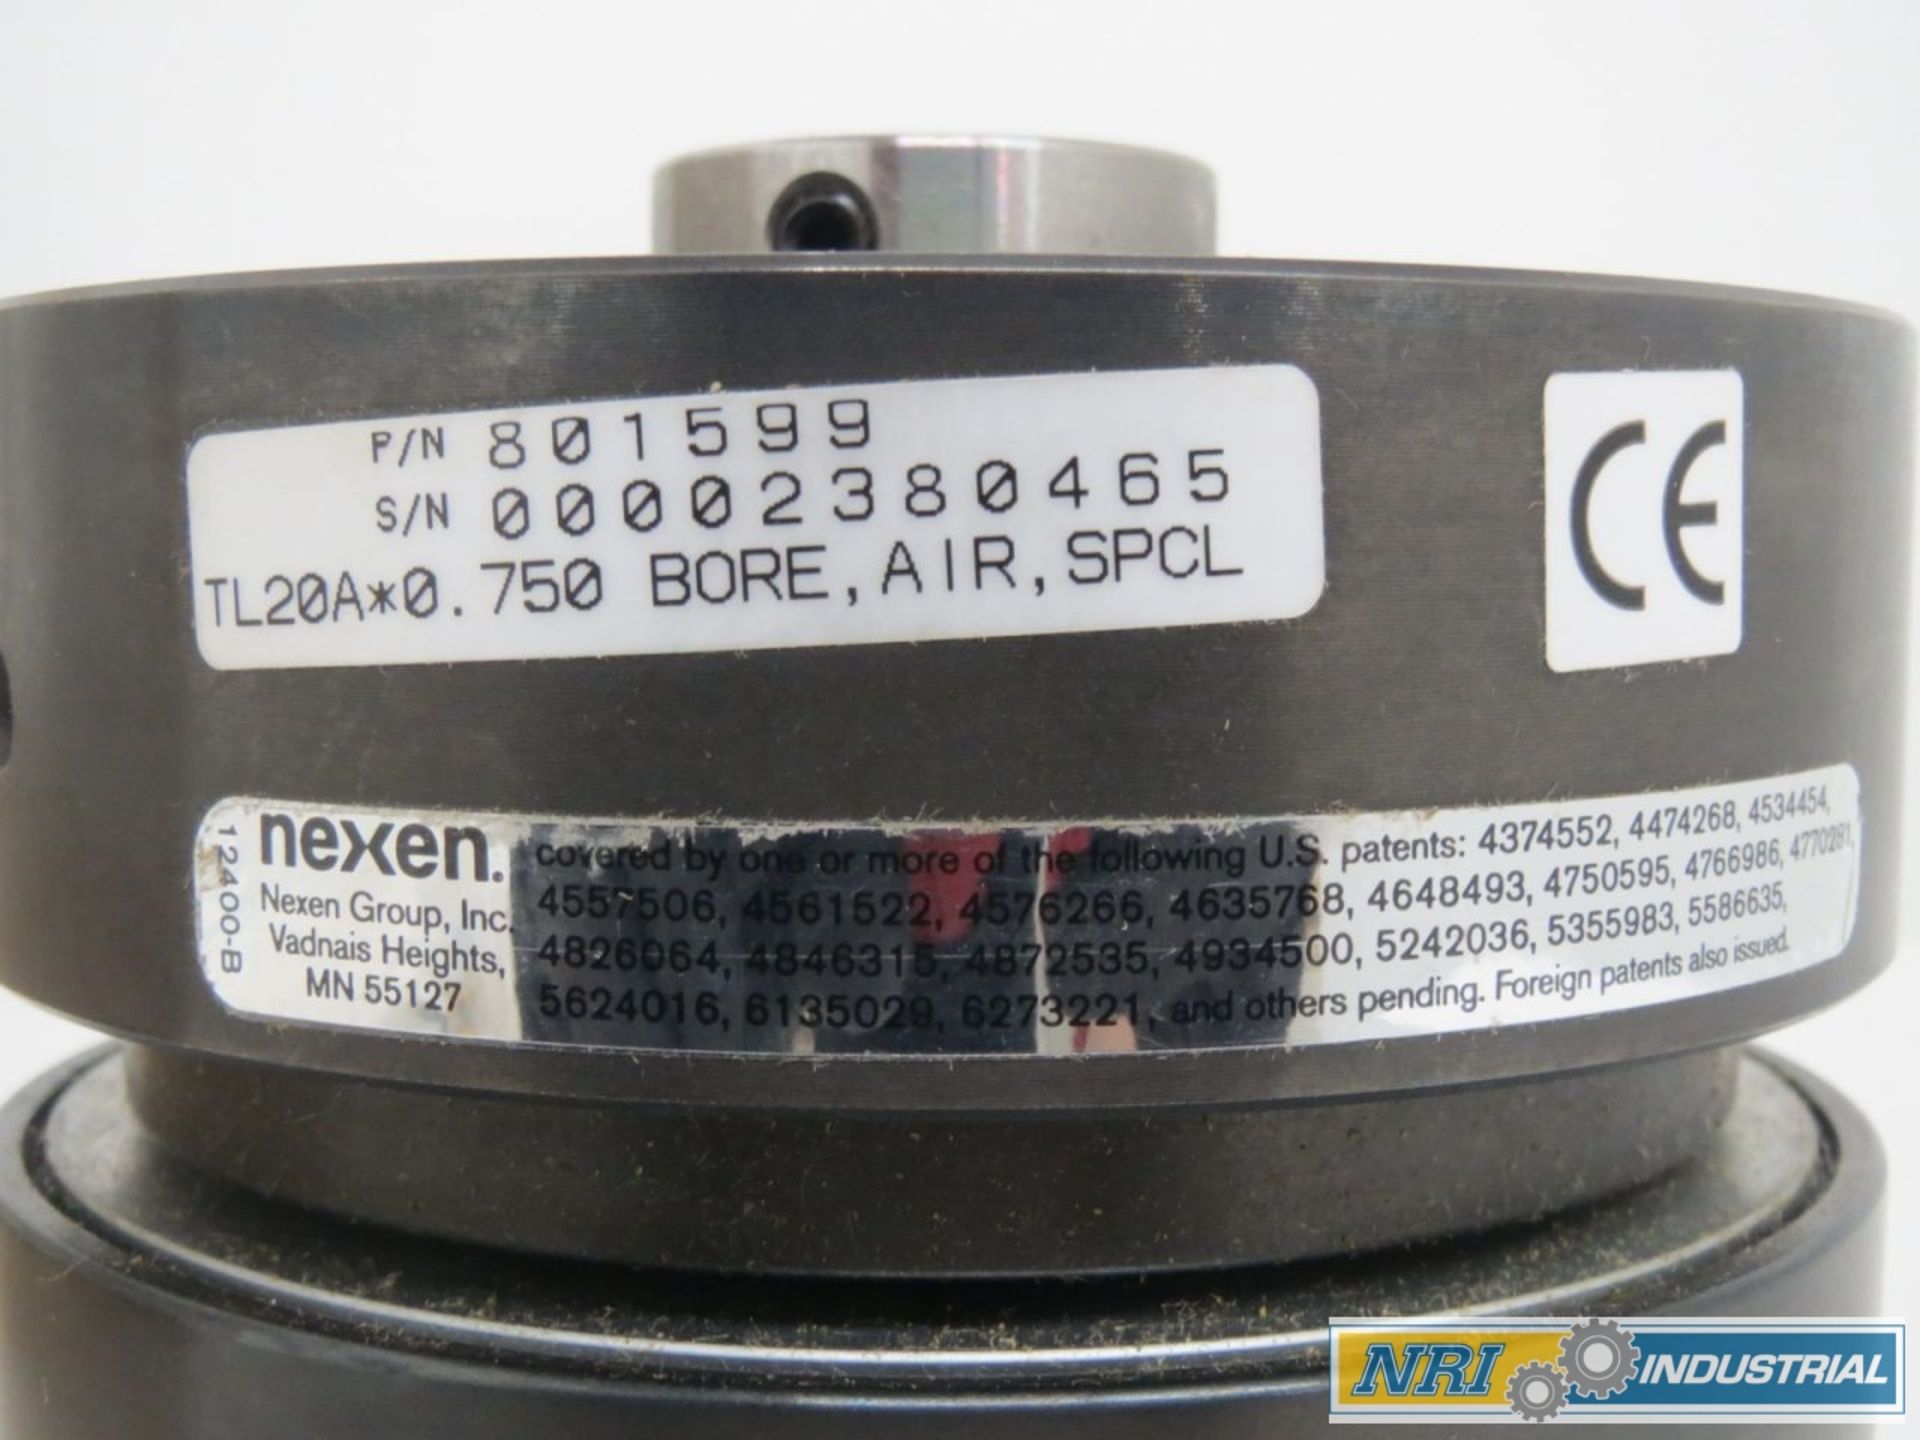 NEXEN 801599 TL20A AIR ENGAGED TORQUE LIMITER 3/4 IN CLUTCH - Image 2 of 3